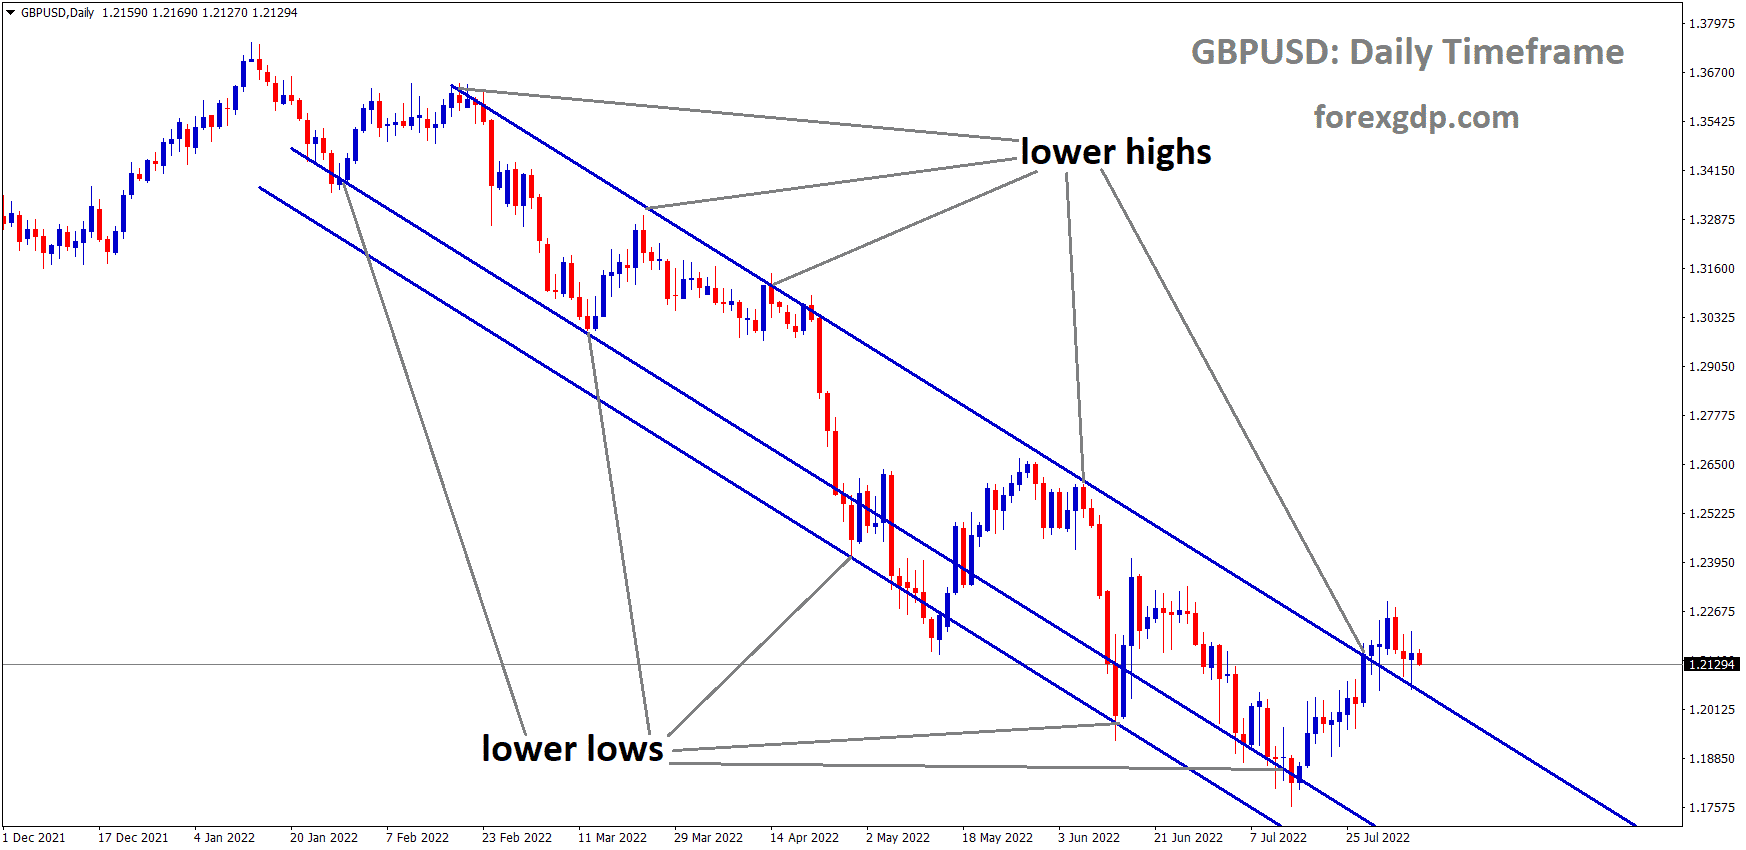 GBPUSD is moving in the Descending channel and the market has reached the Lower high area of the channel 1